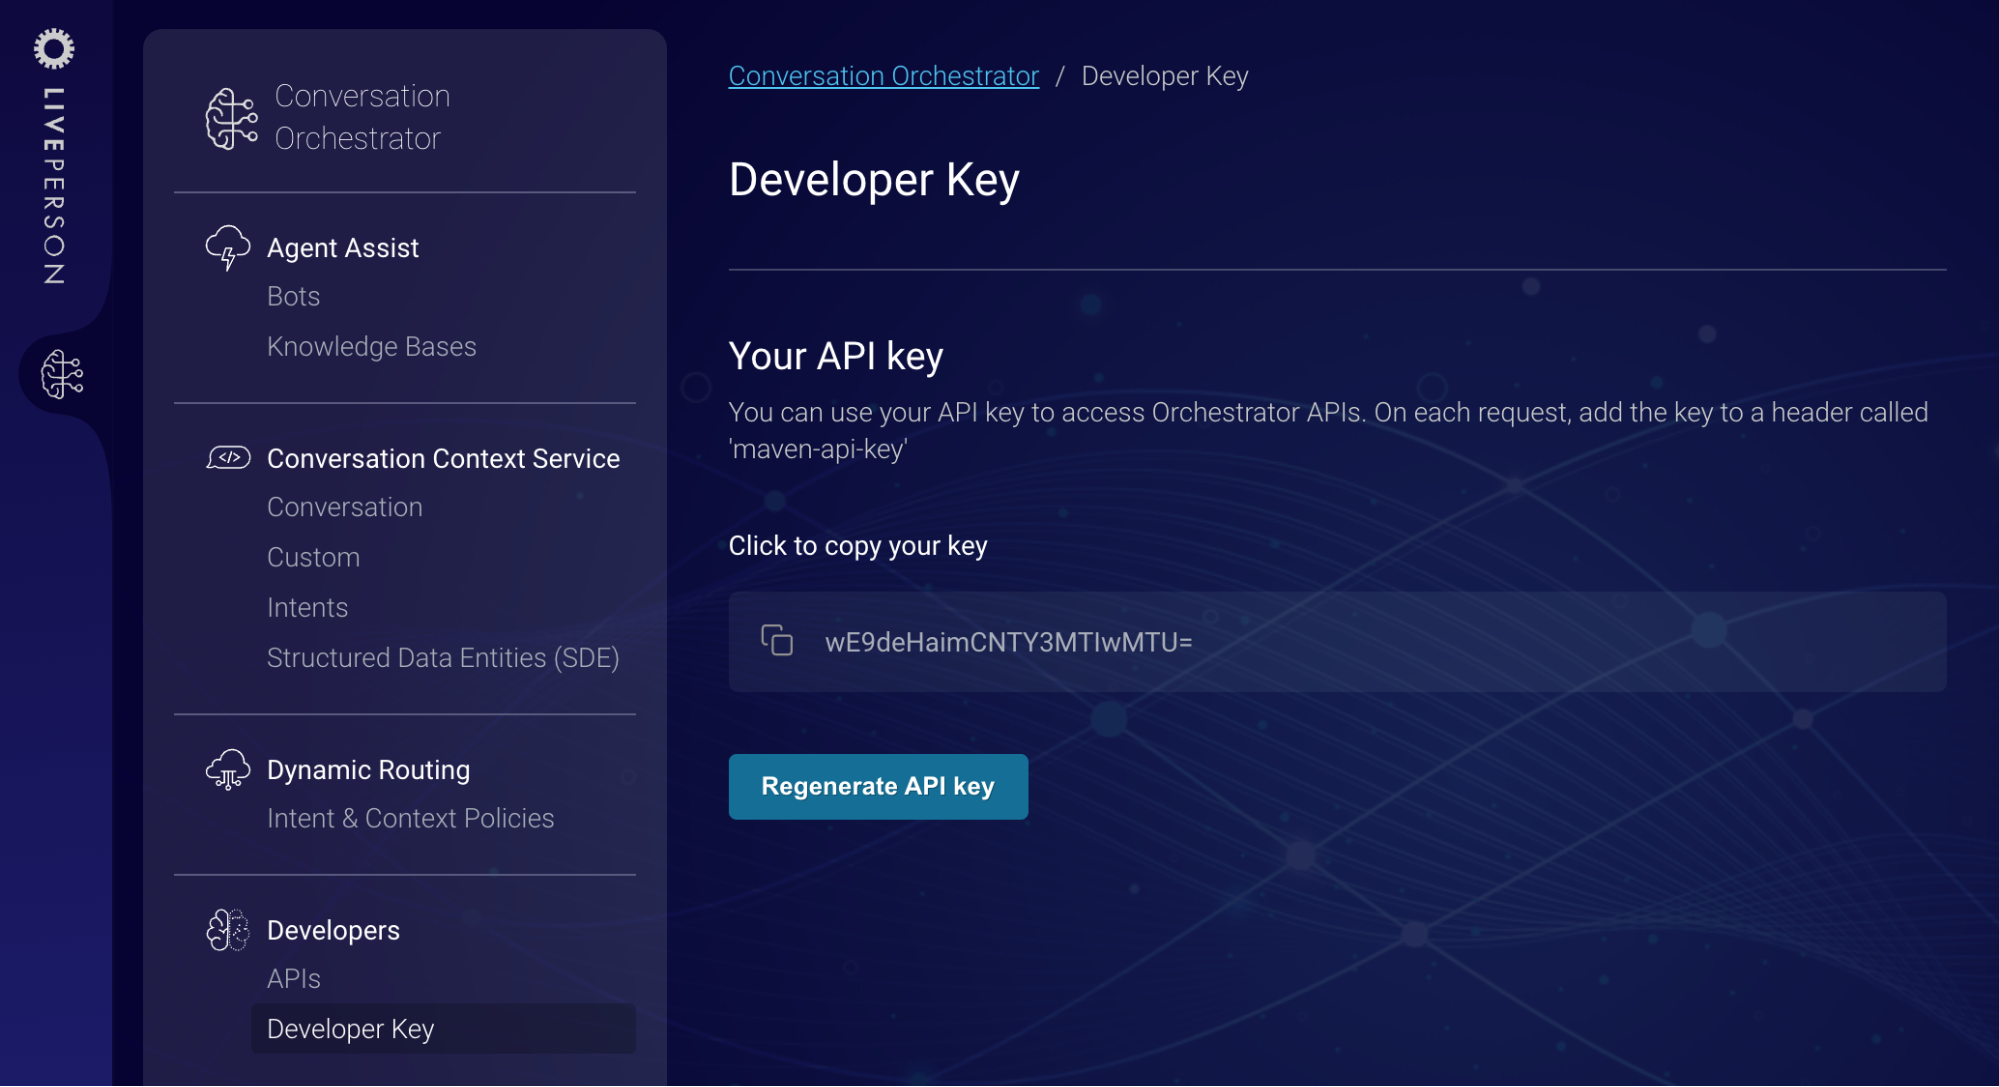 The Developer Key page where you can copy your API key